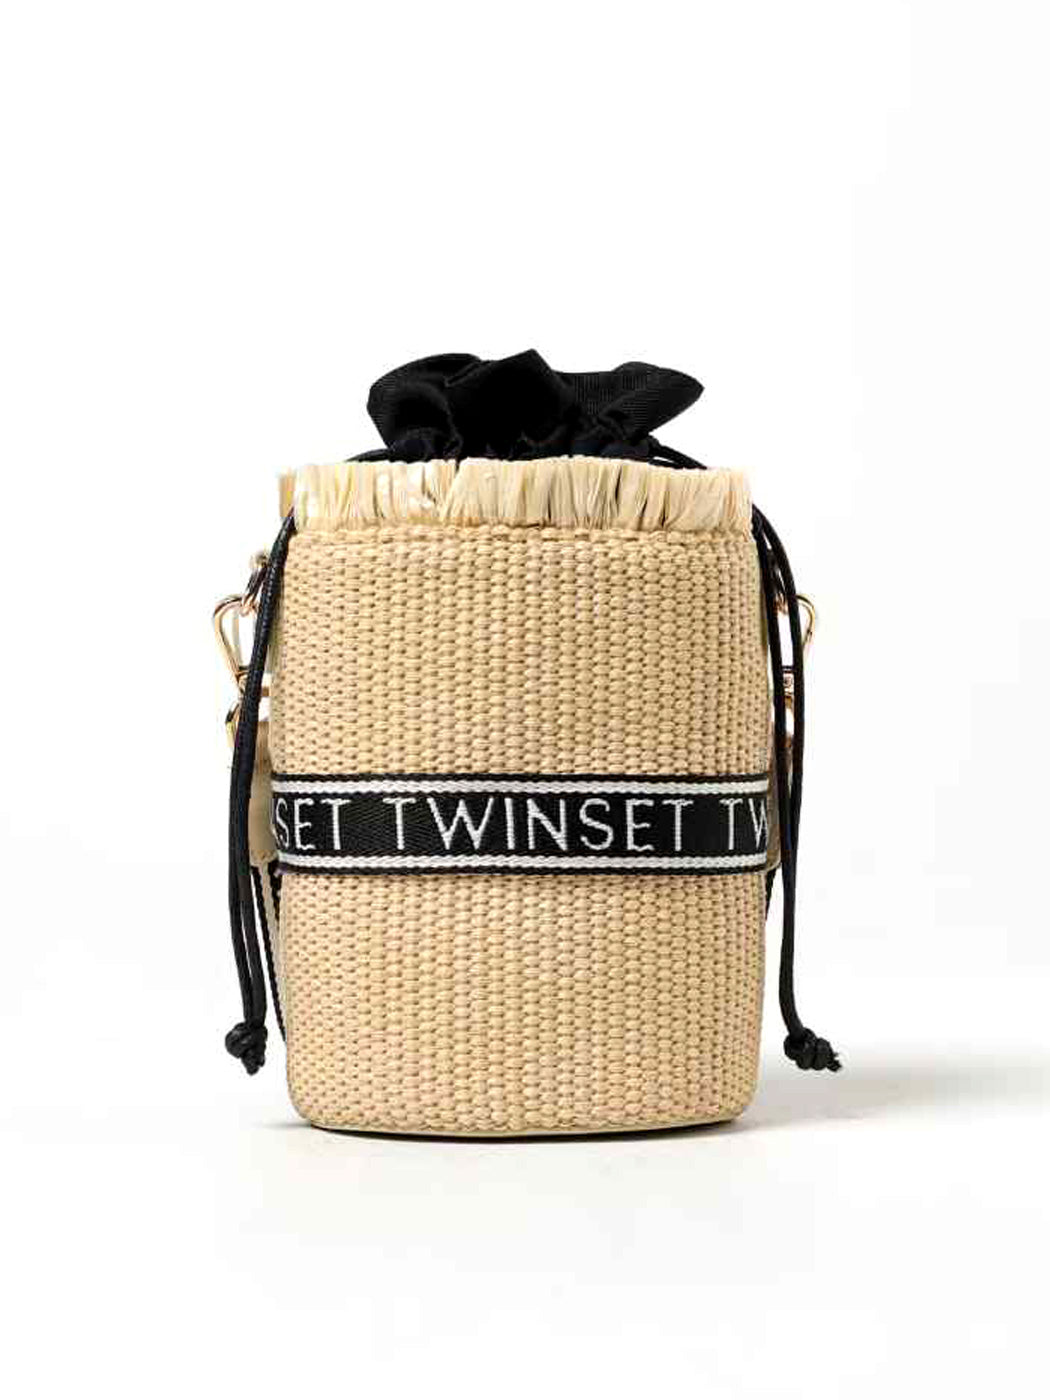 Twinset Straw bag for girl-241GJ8011